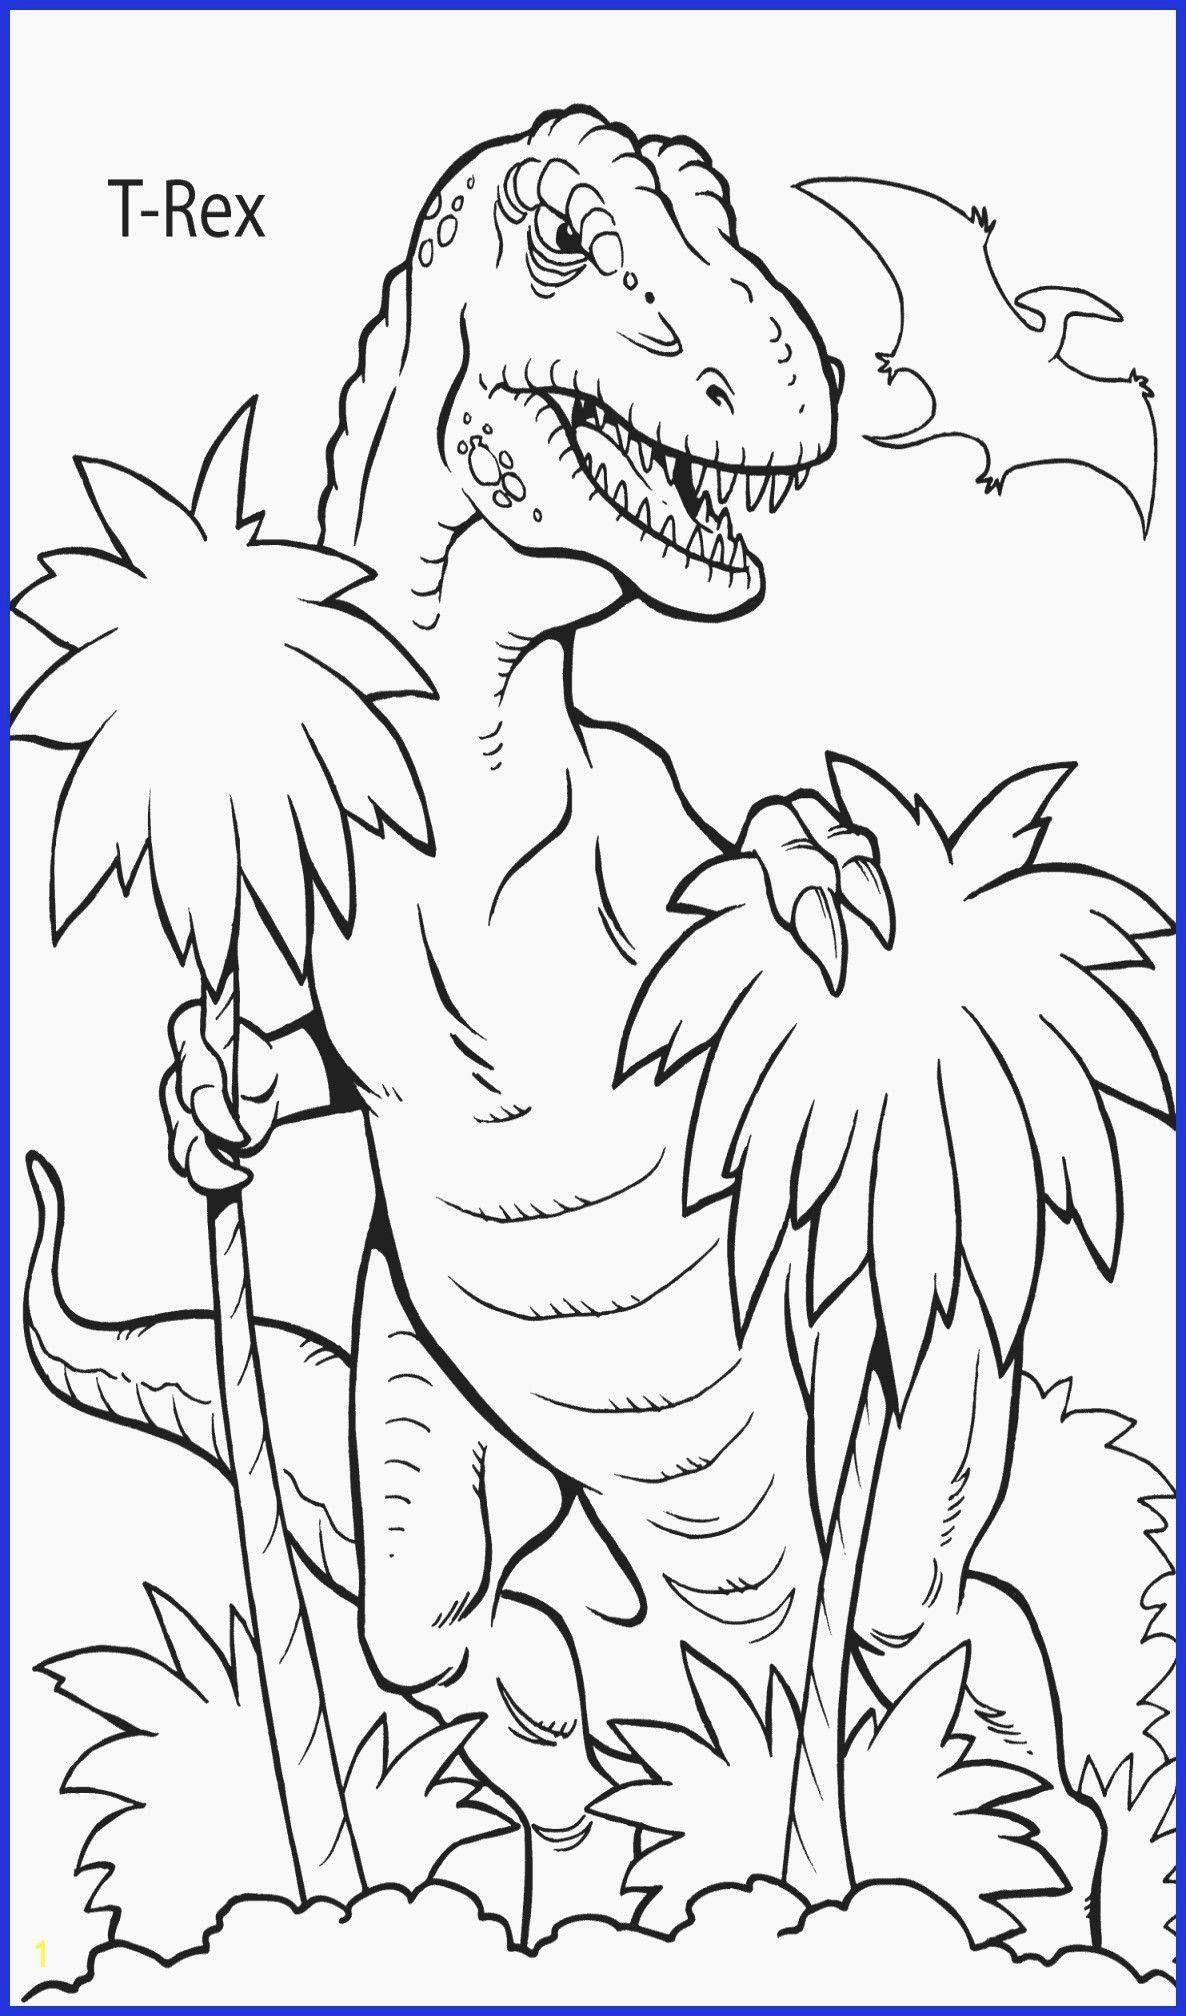 Coloring Dinosaurs Toys Best Of Jurassic World Coloring Pages ...